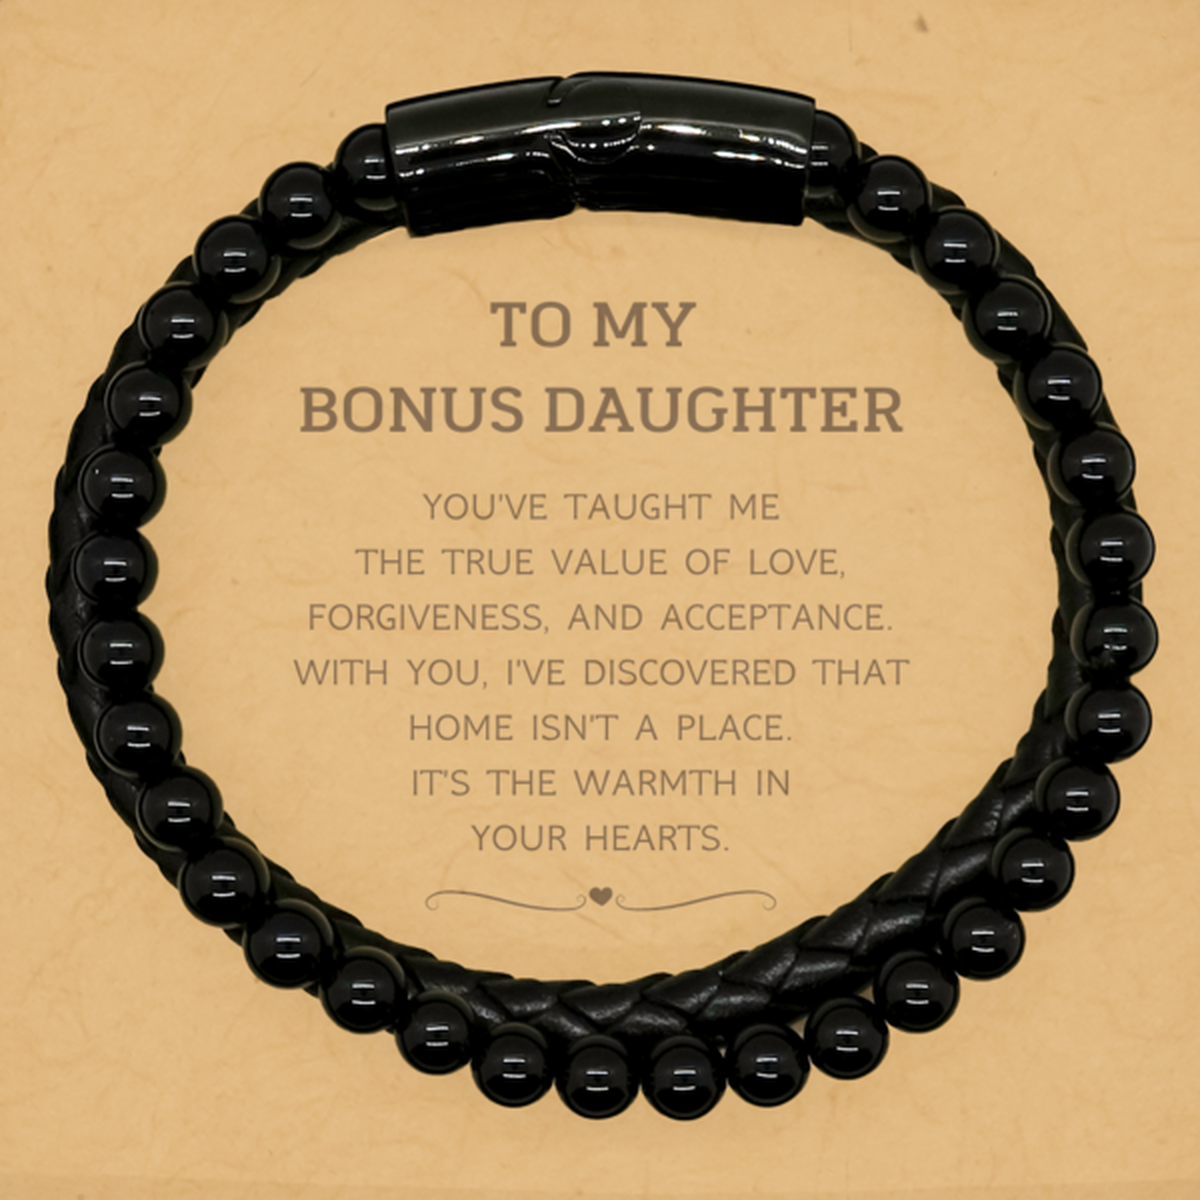 To My Bonus Daughter Gifts, You've taught me the true value of love, Thank You Gifts For Bonus Daughter, Birthday Stone Leather Bracelets For Bonus Daughter